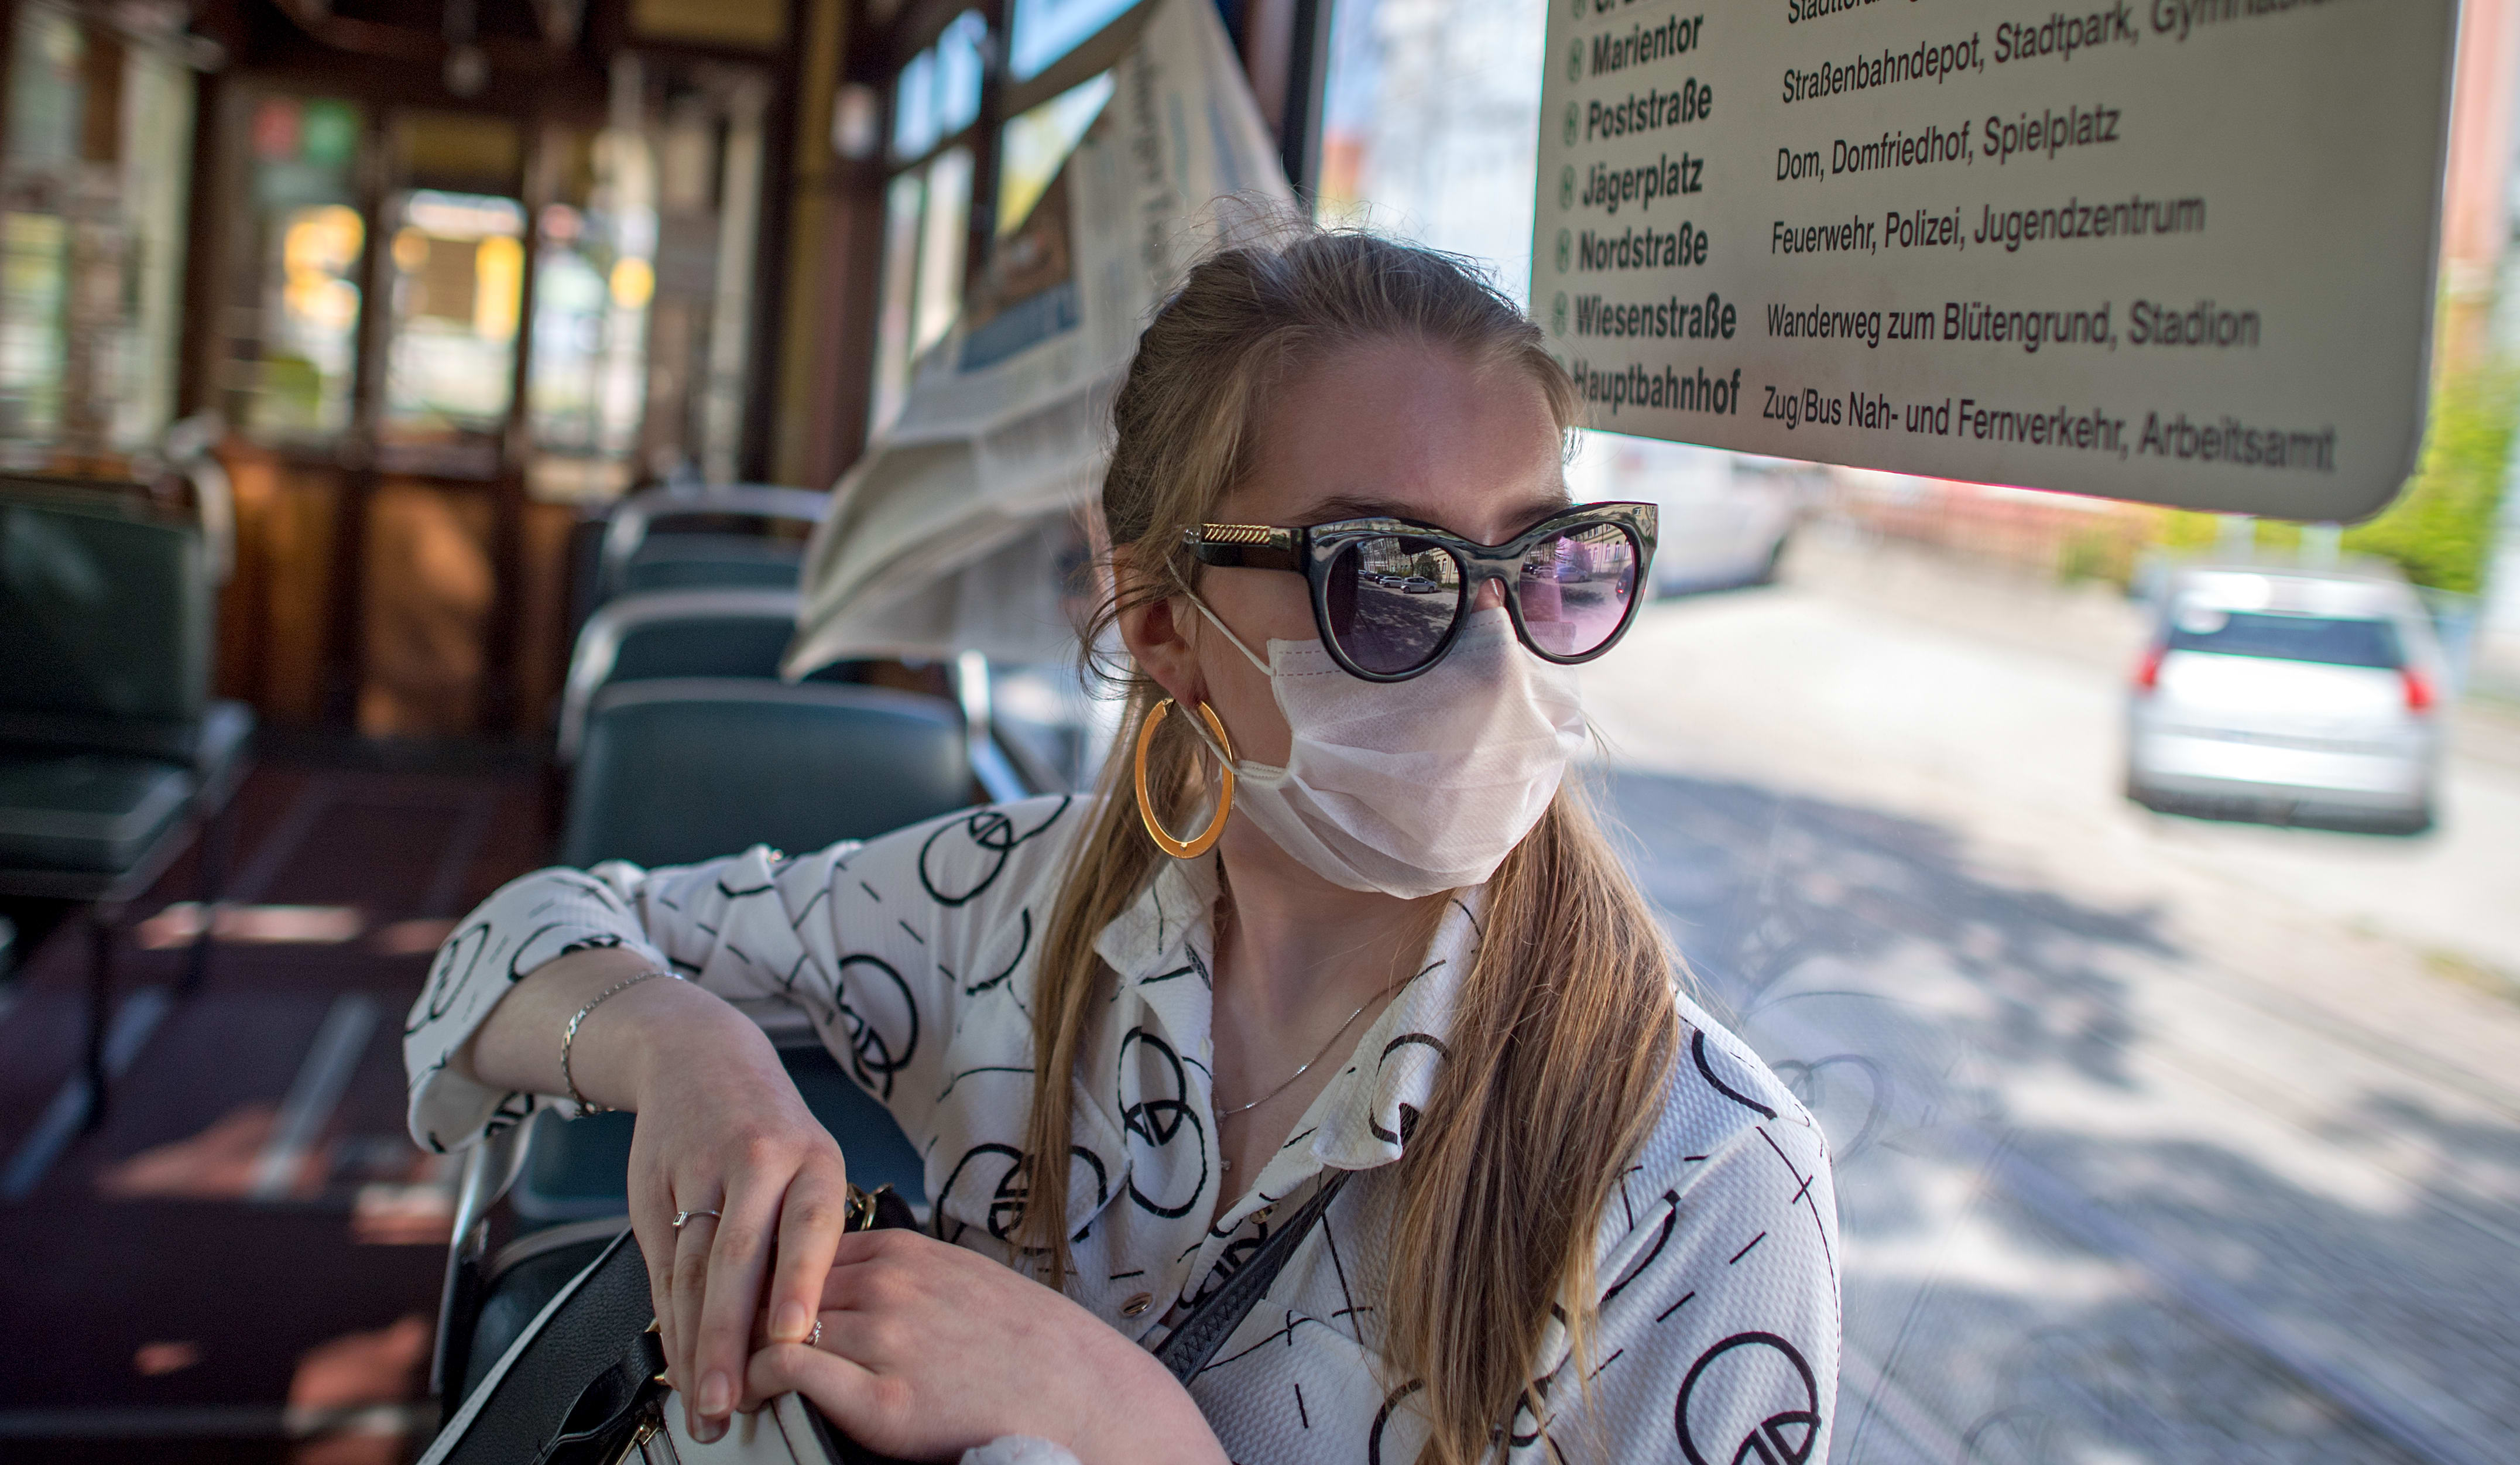 Even in the smallest tram operation in Germany, passengers will be required to wear masks from 23 April 2020.